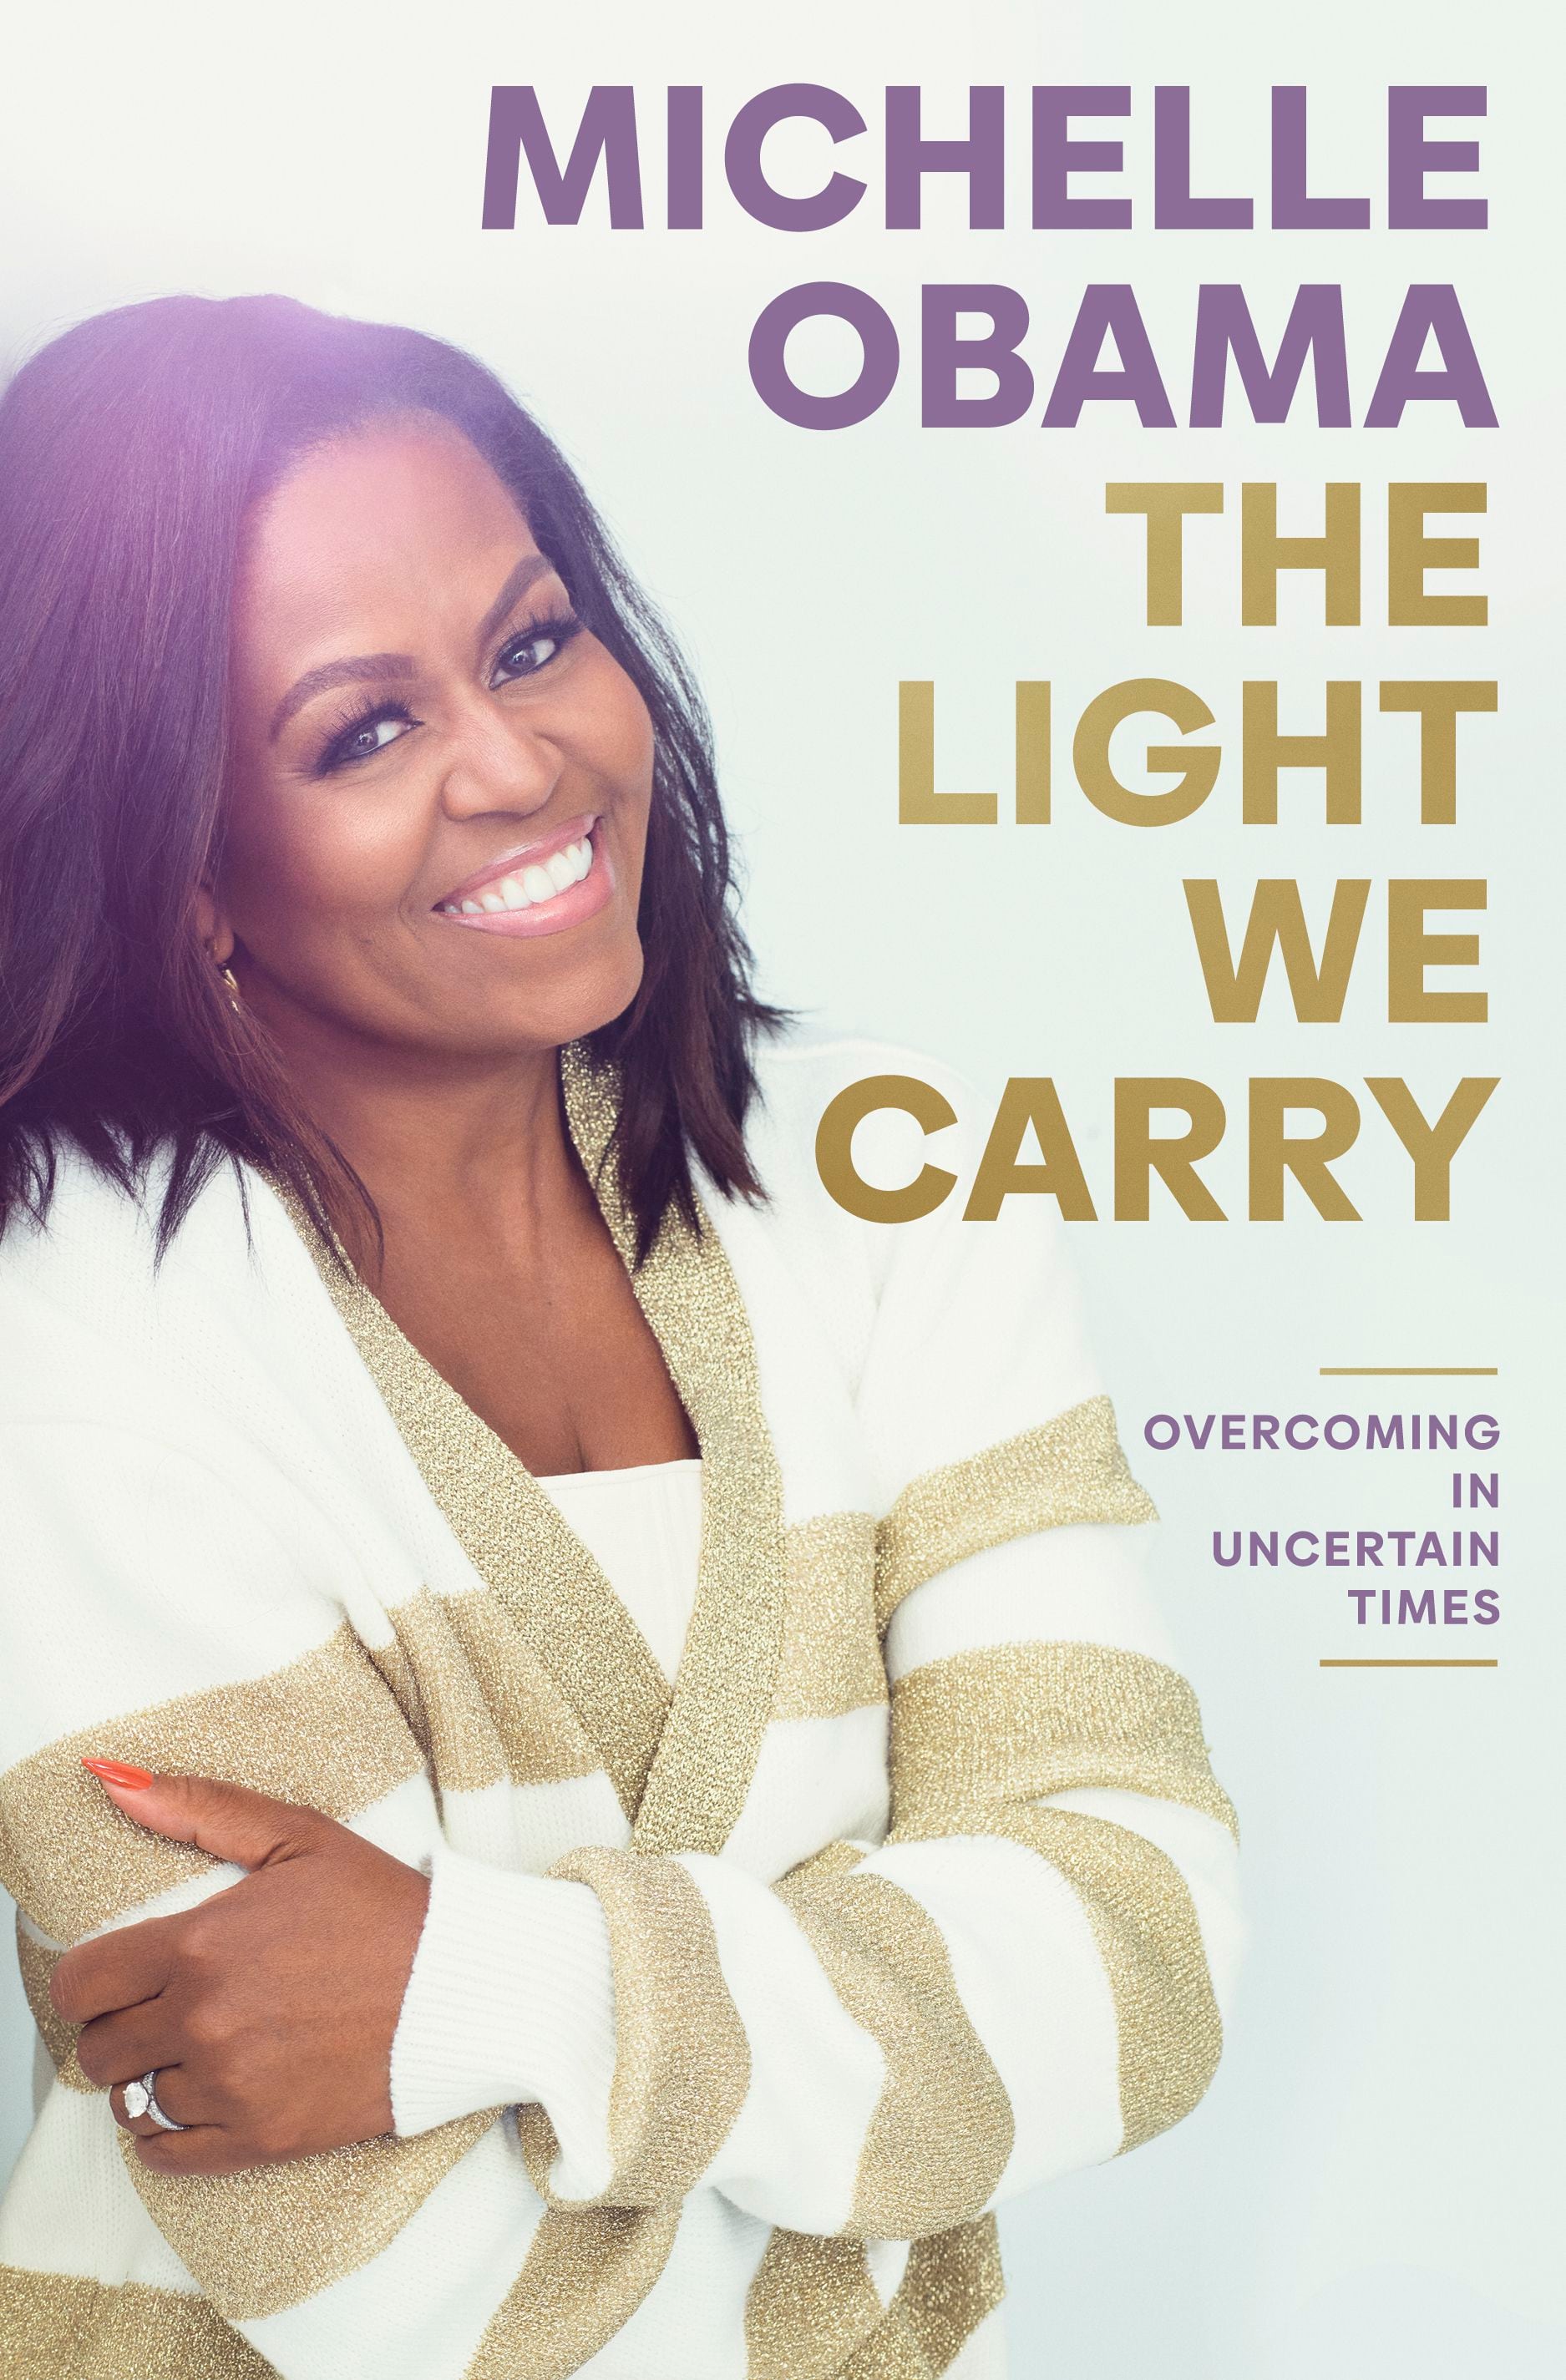 Michelle Obama plans 6-city tour for ‘The Light We Carry’